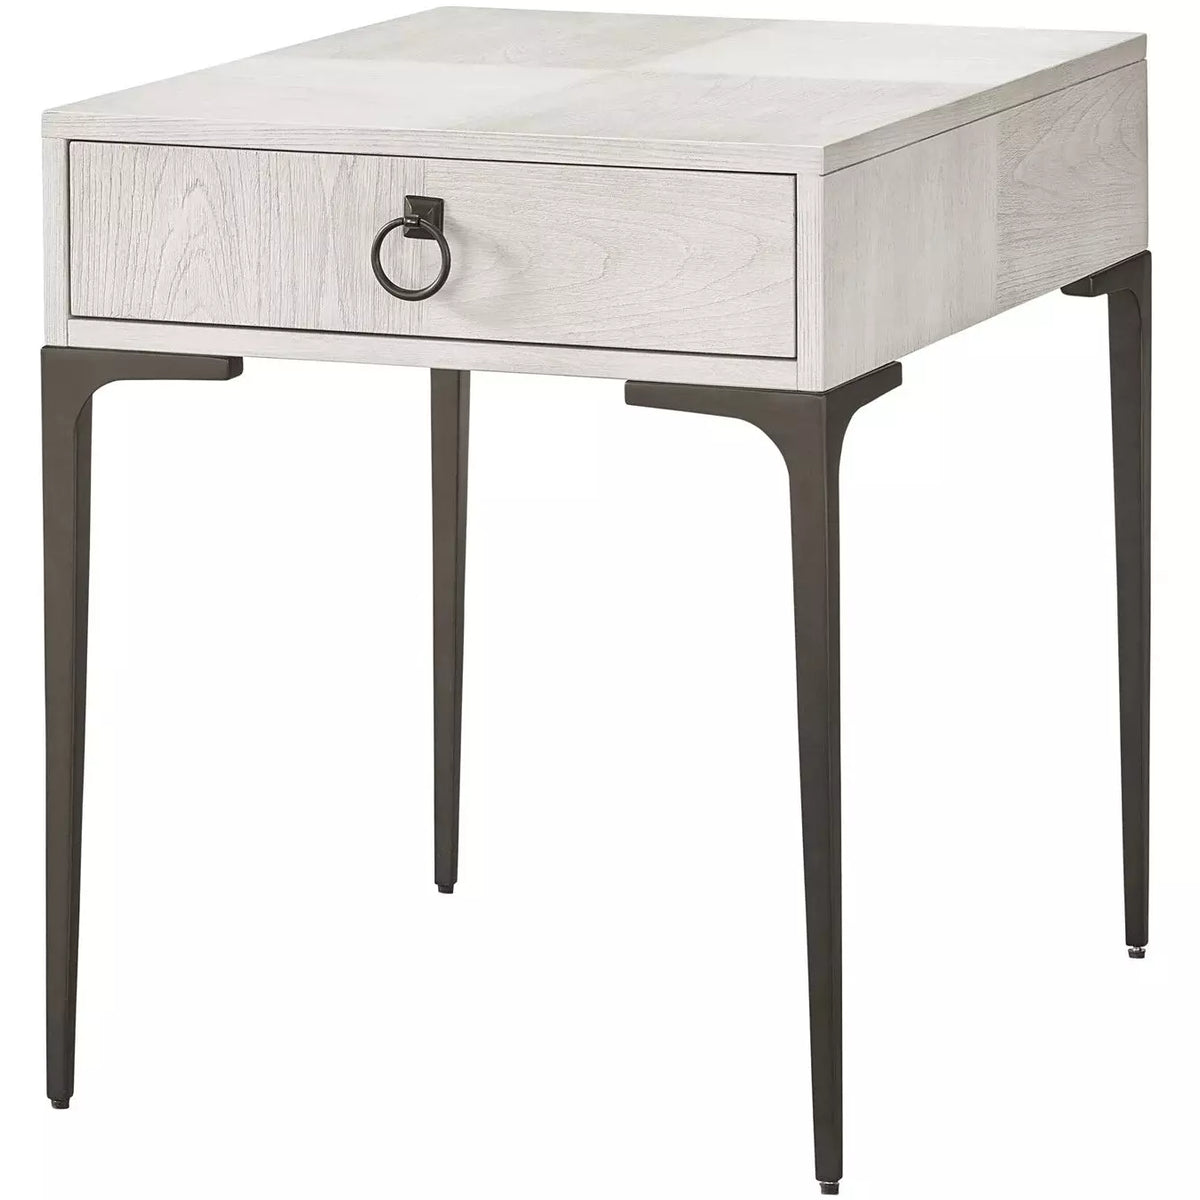 Dahlia Drawer End Table - Be Bold Furniture